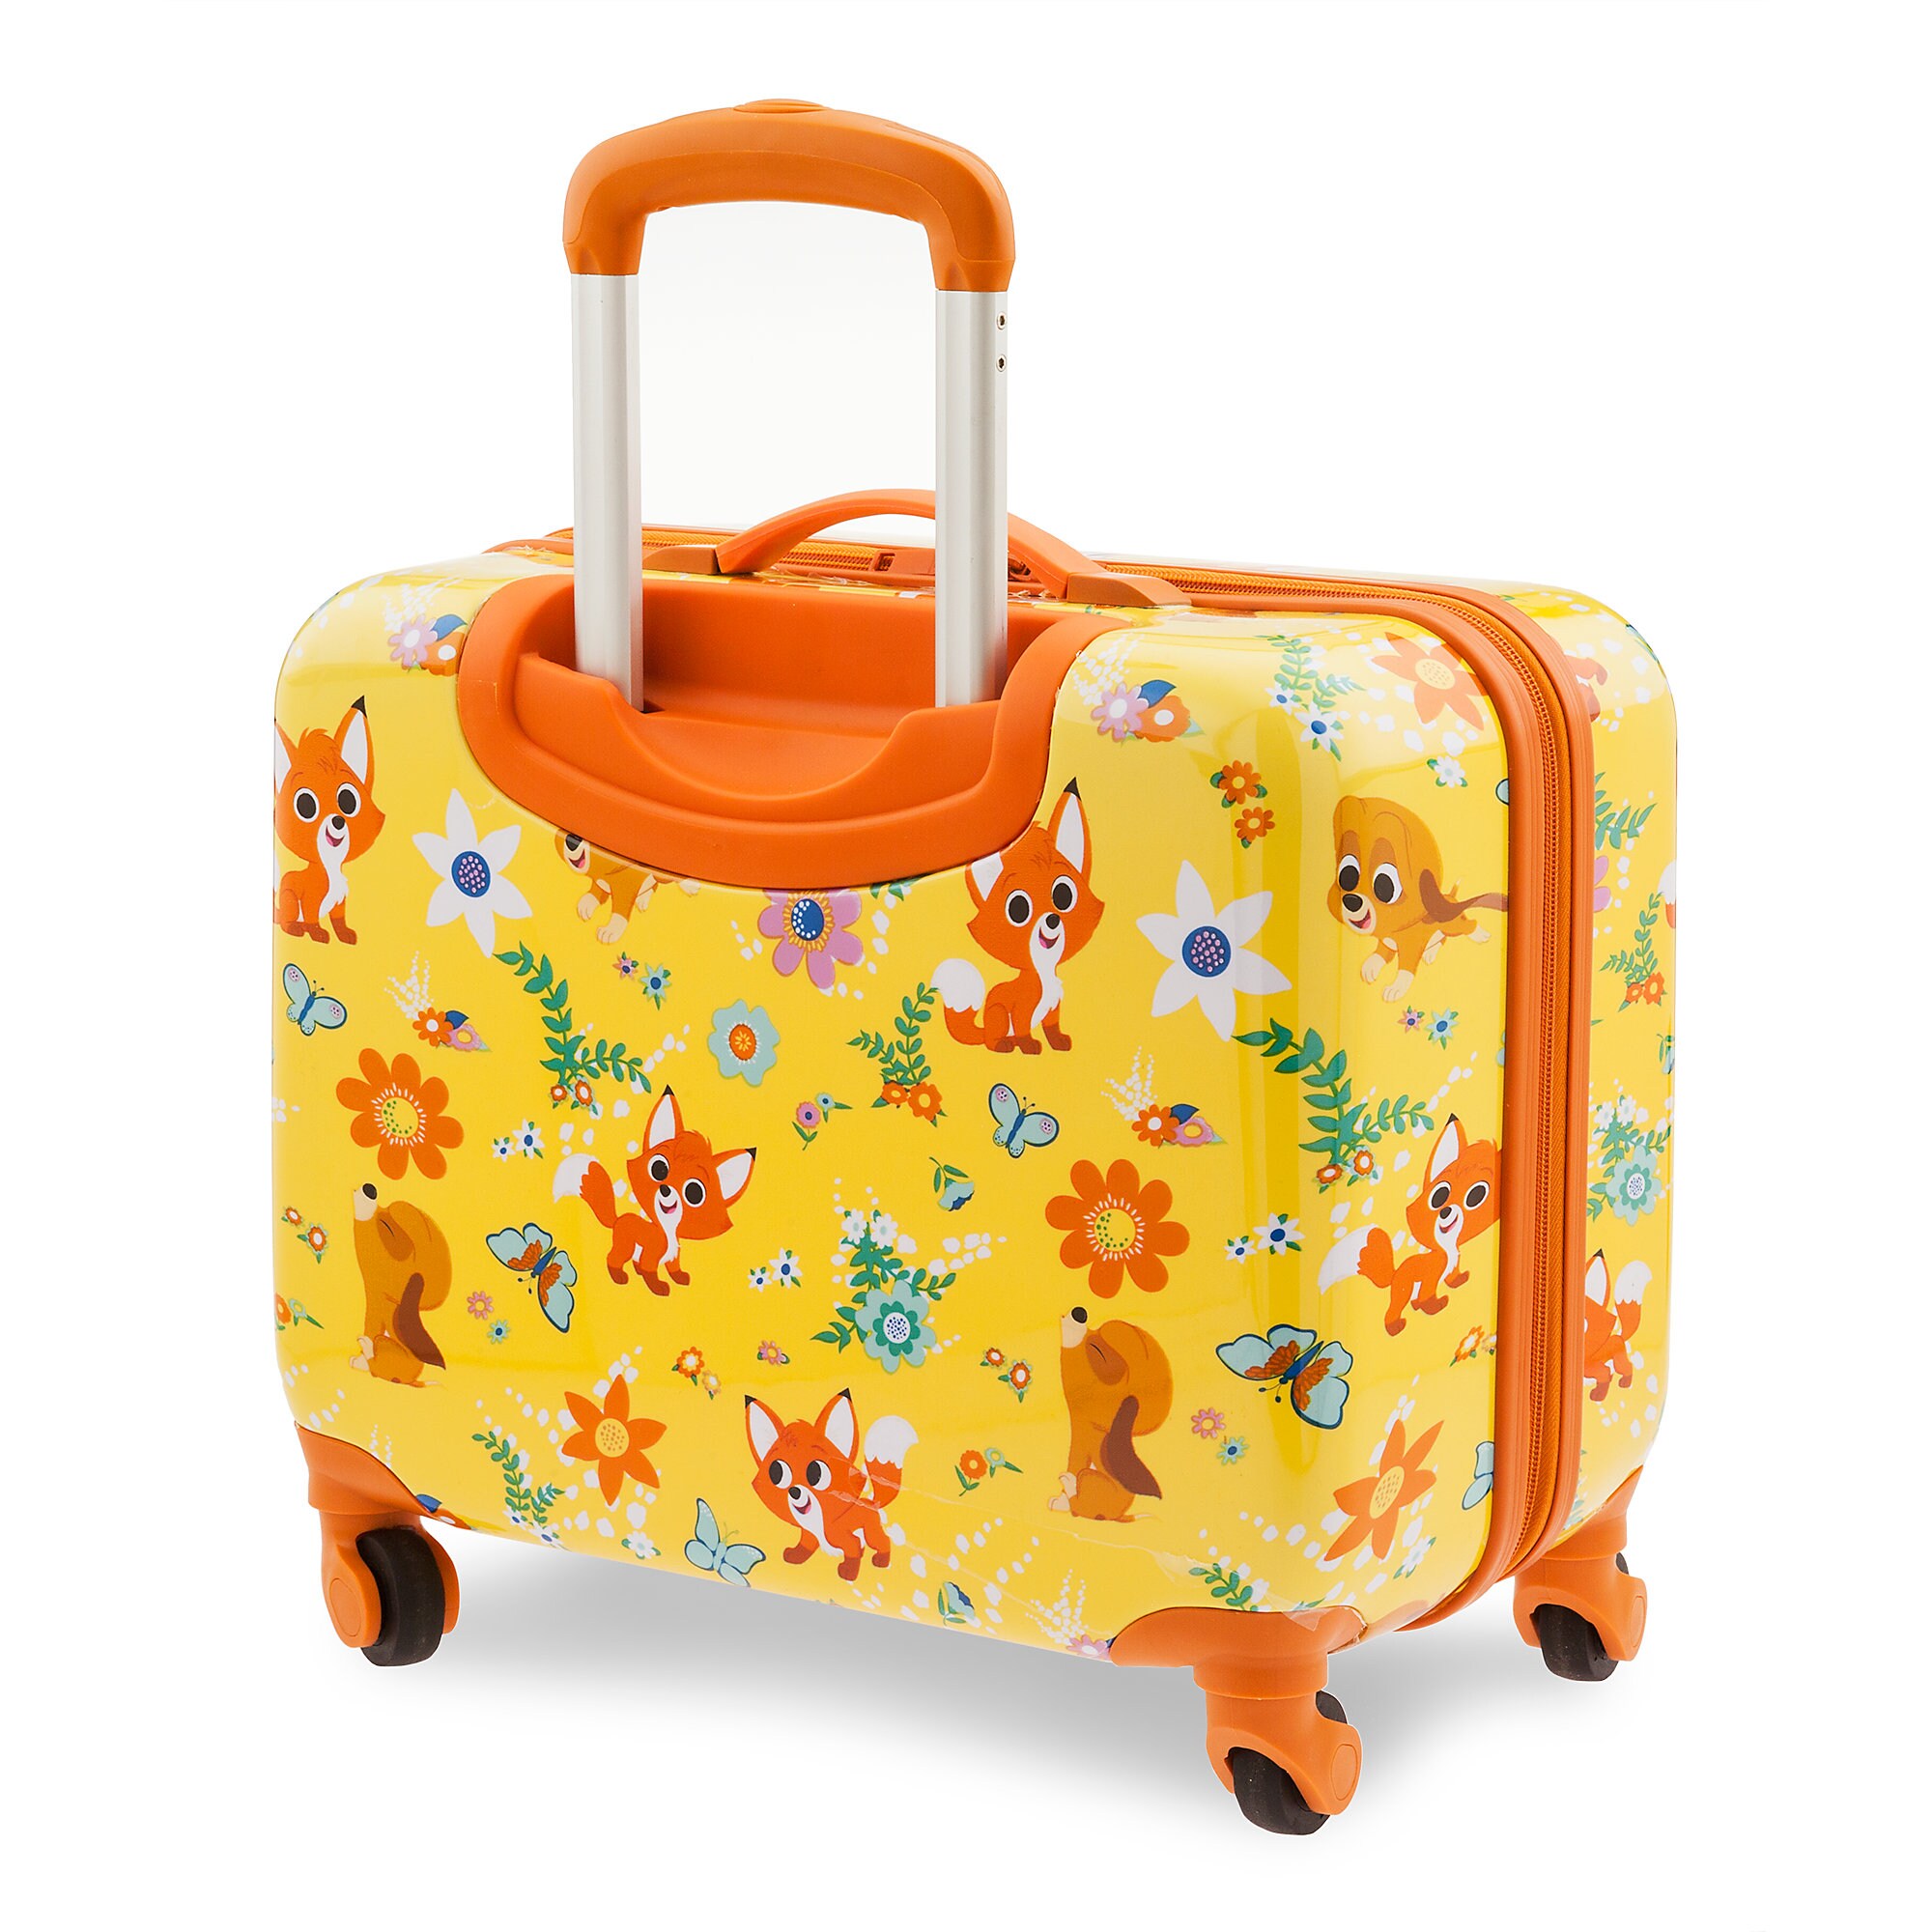 The Fox and the Hound Rolling Luggage - Disney's Furrytale Friends